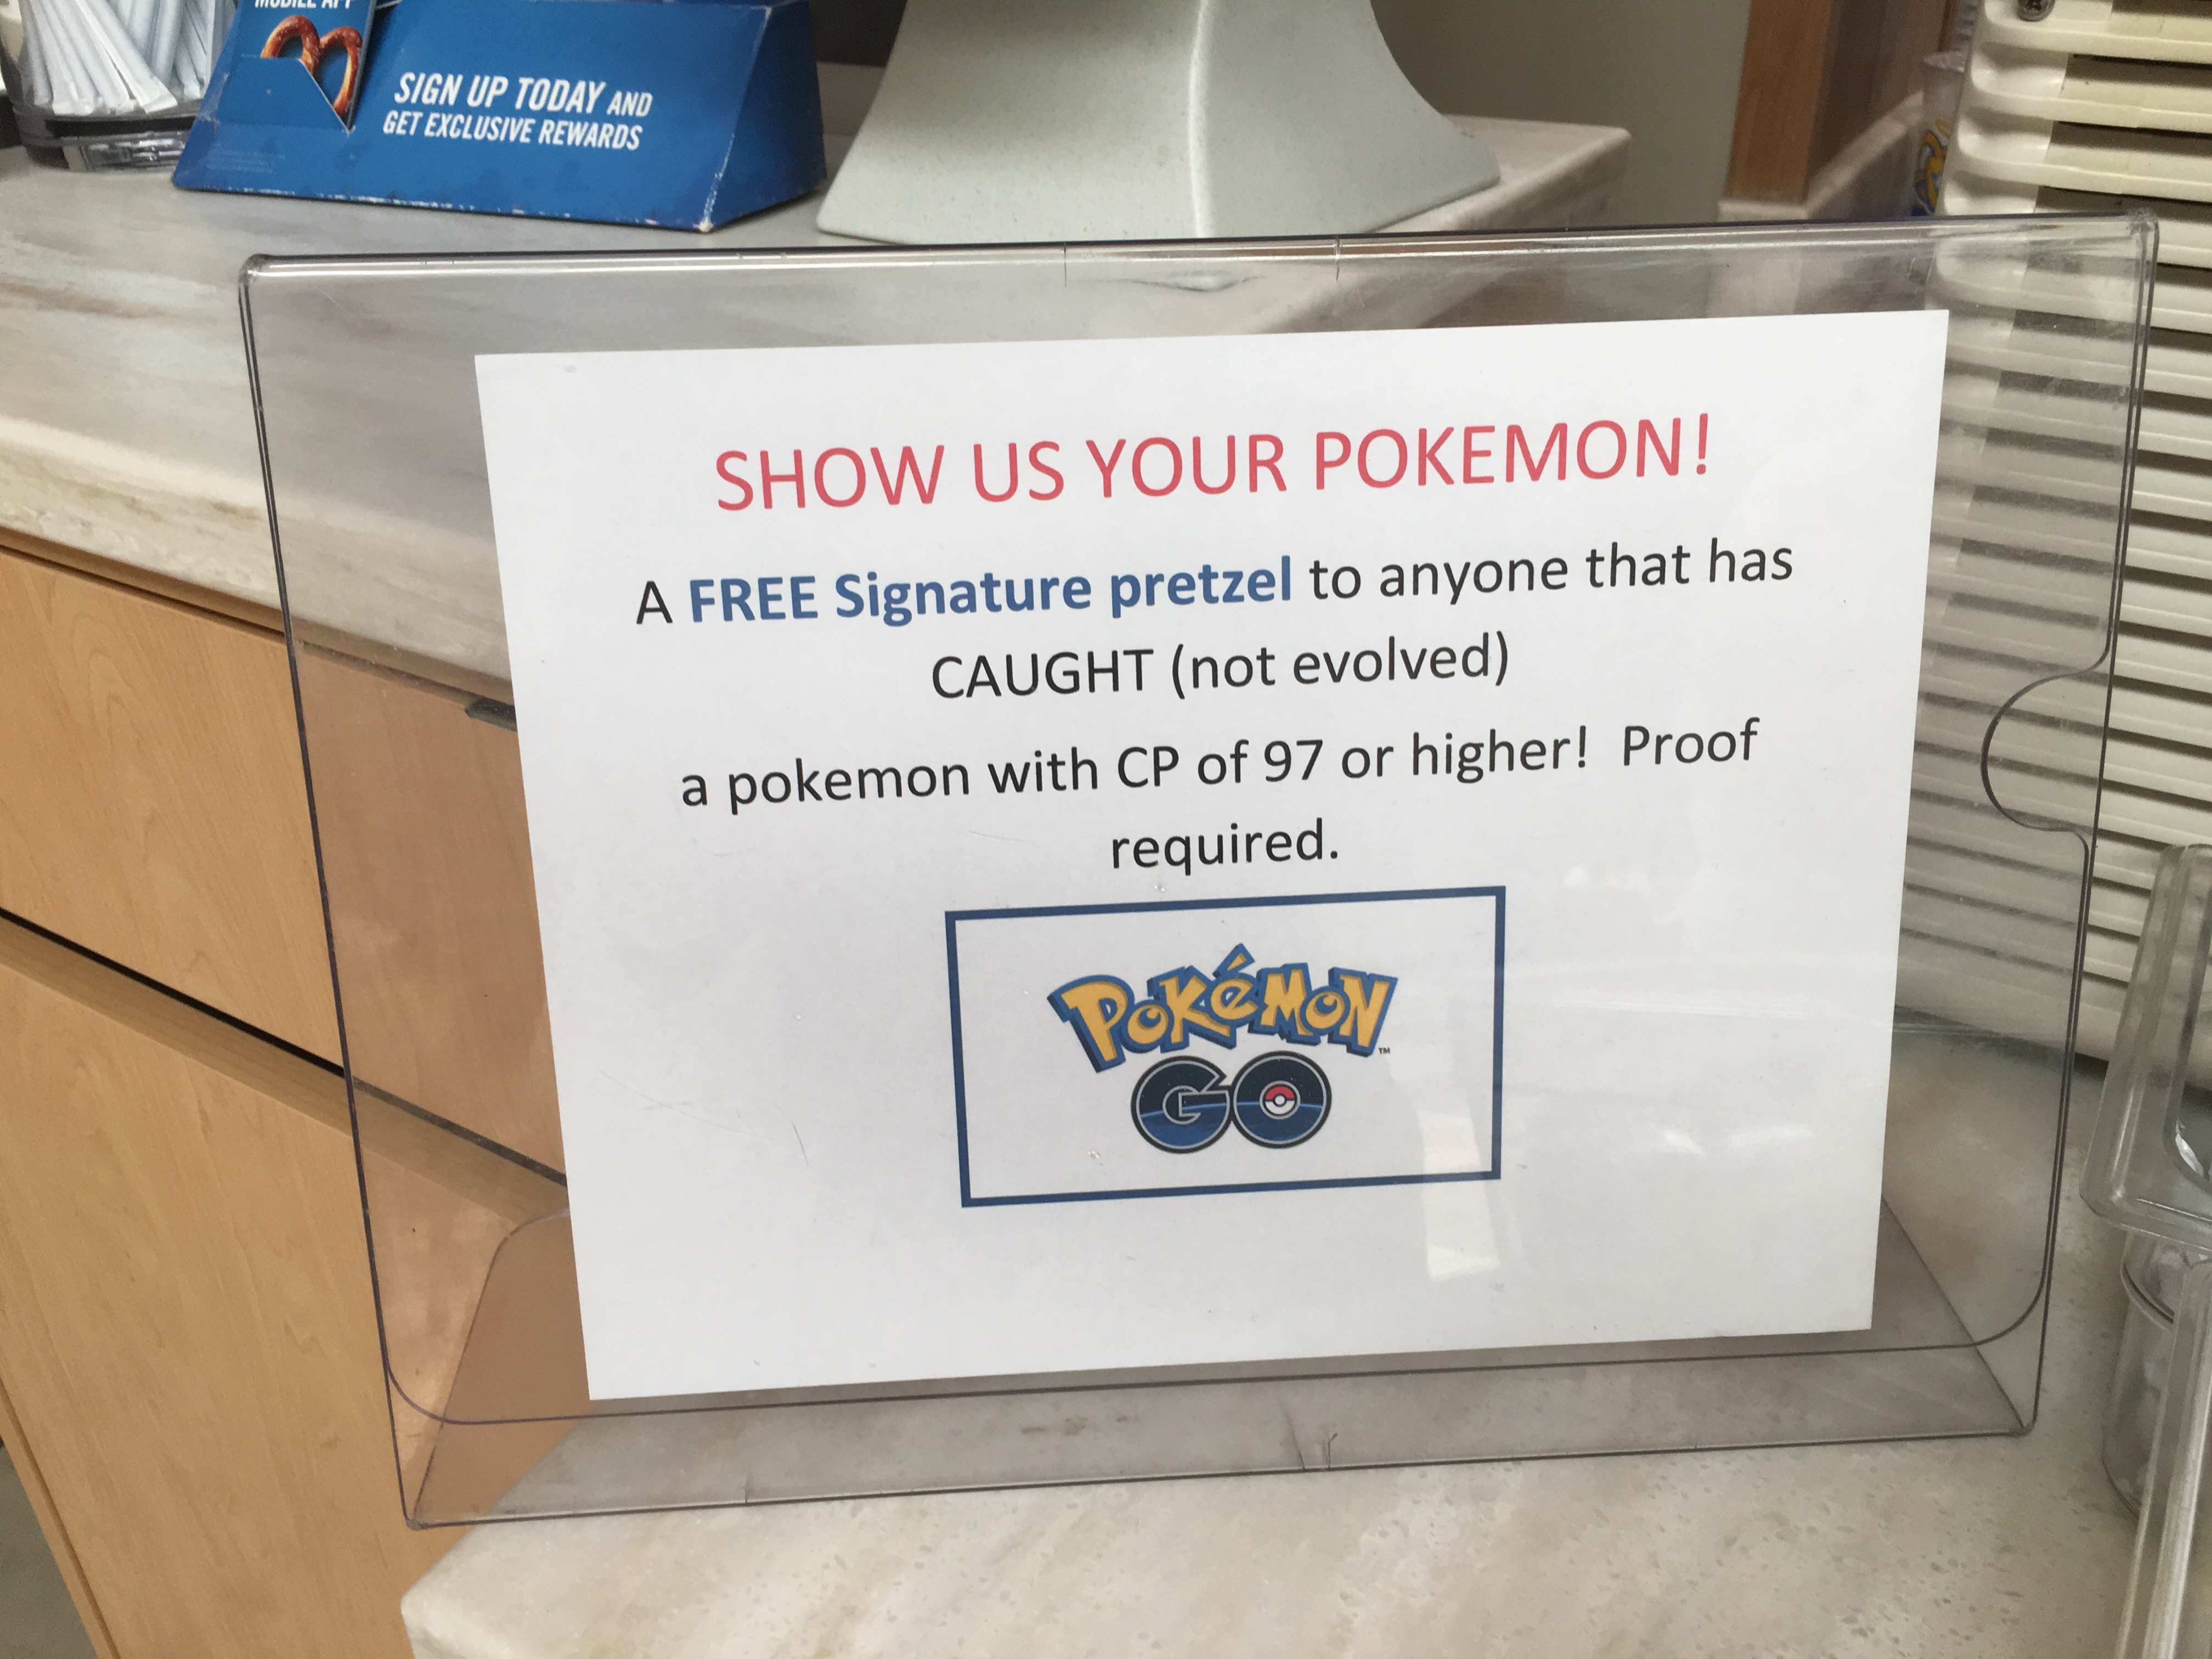 Pokémon Go: Opportunity For SMBs To Try Location Based Marketing